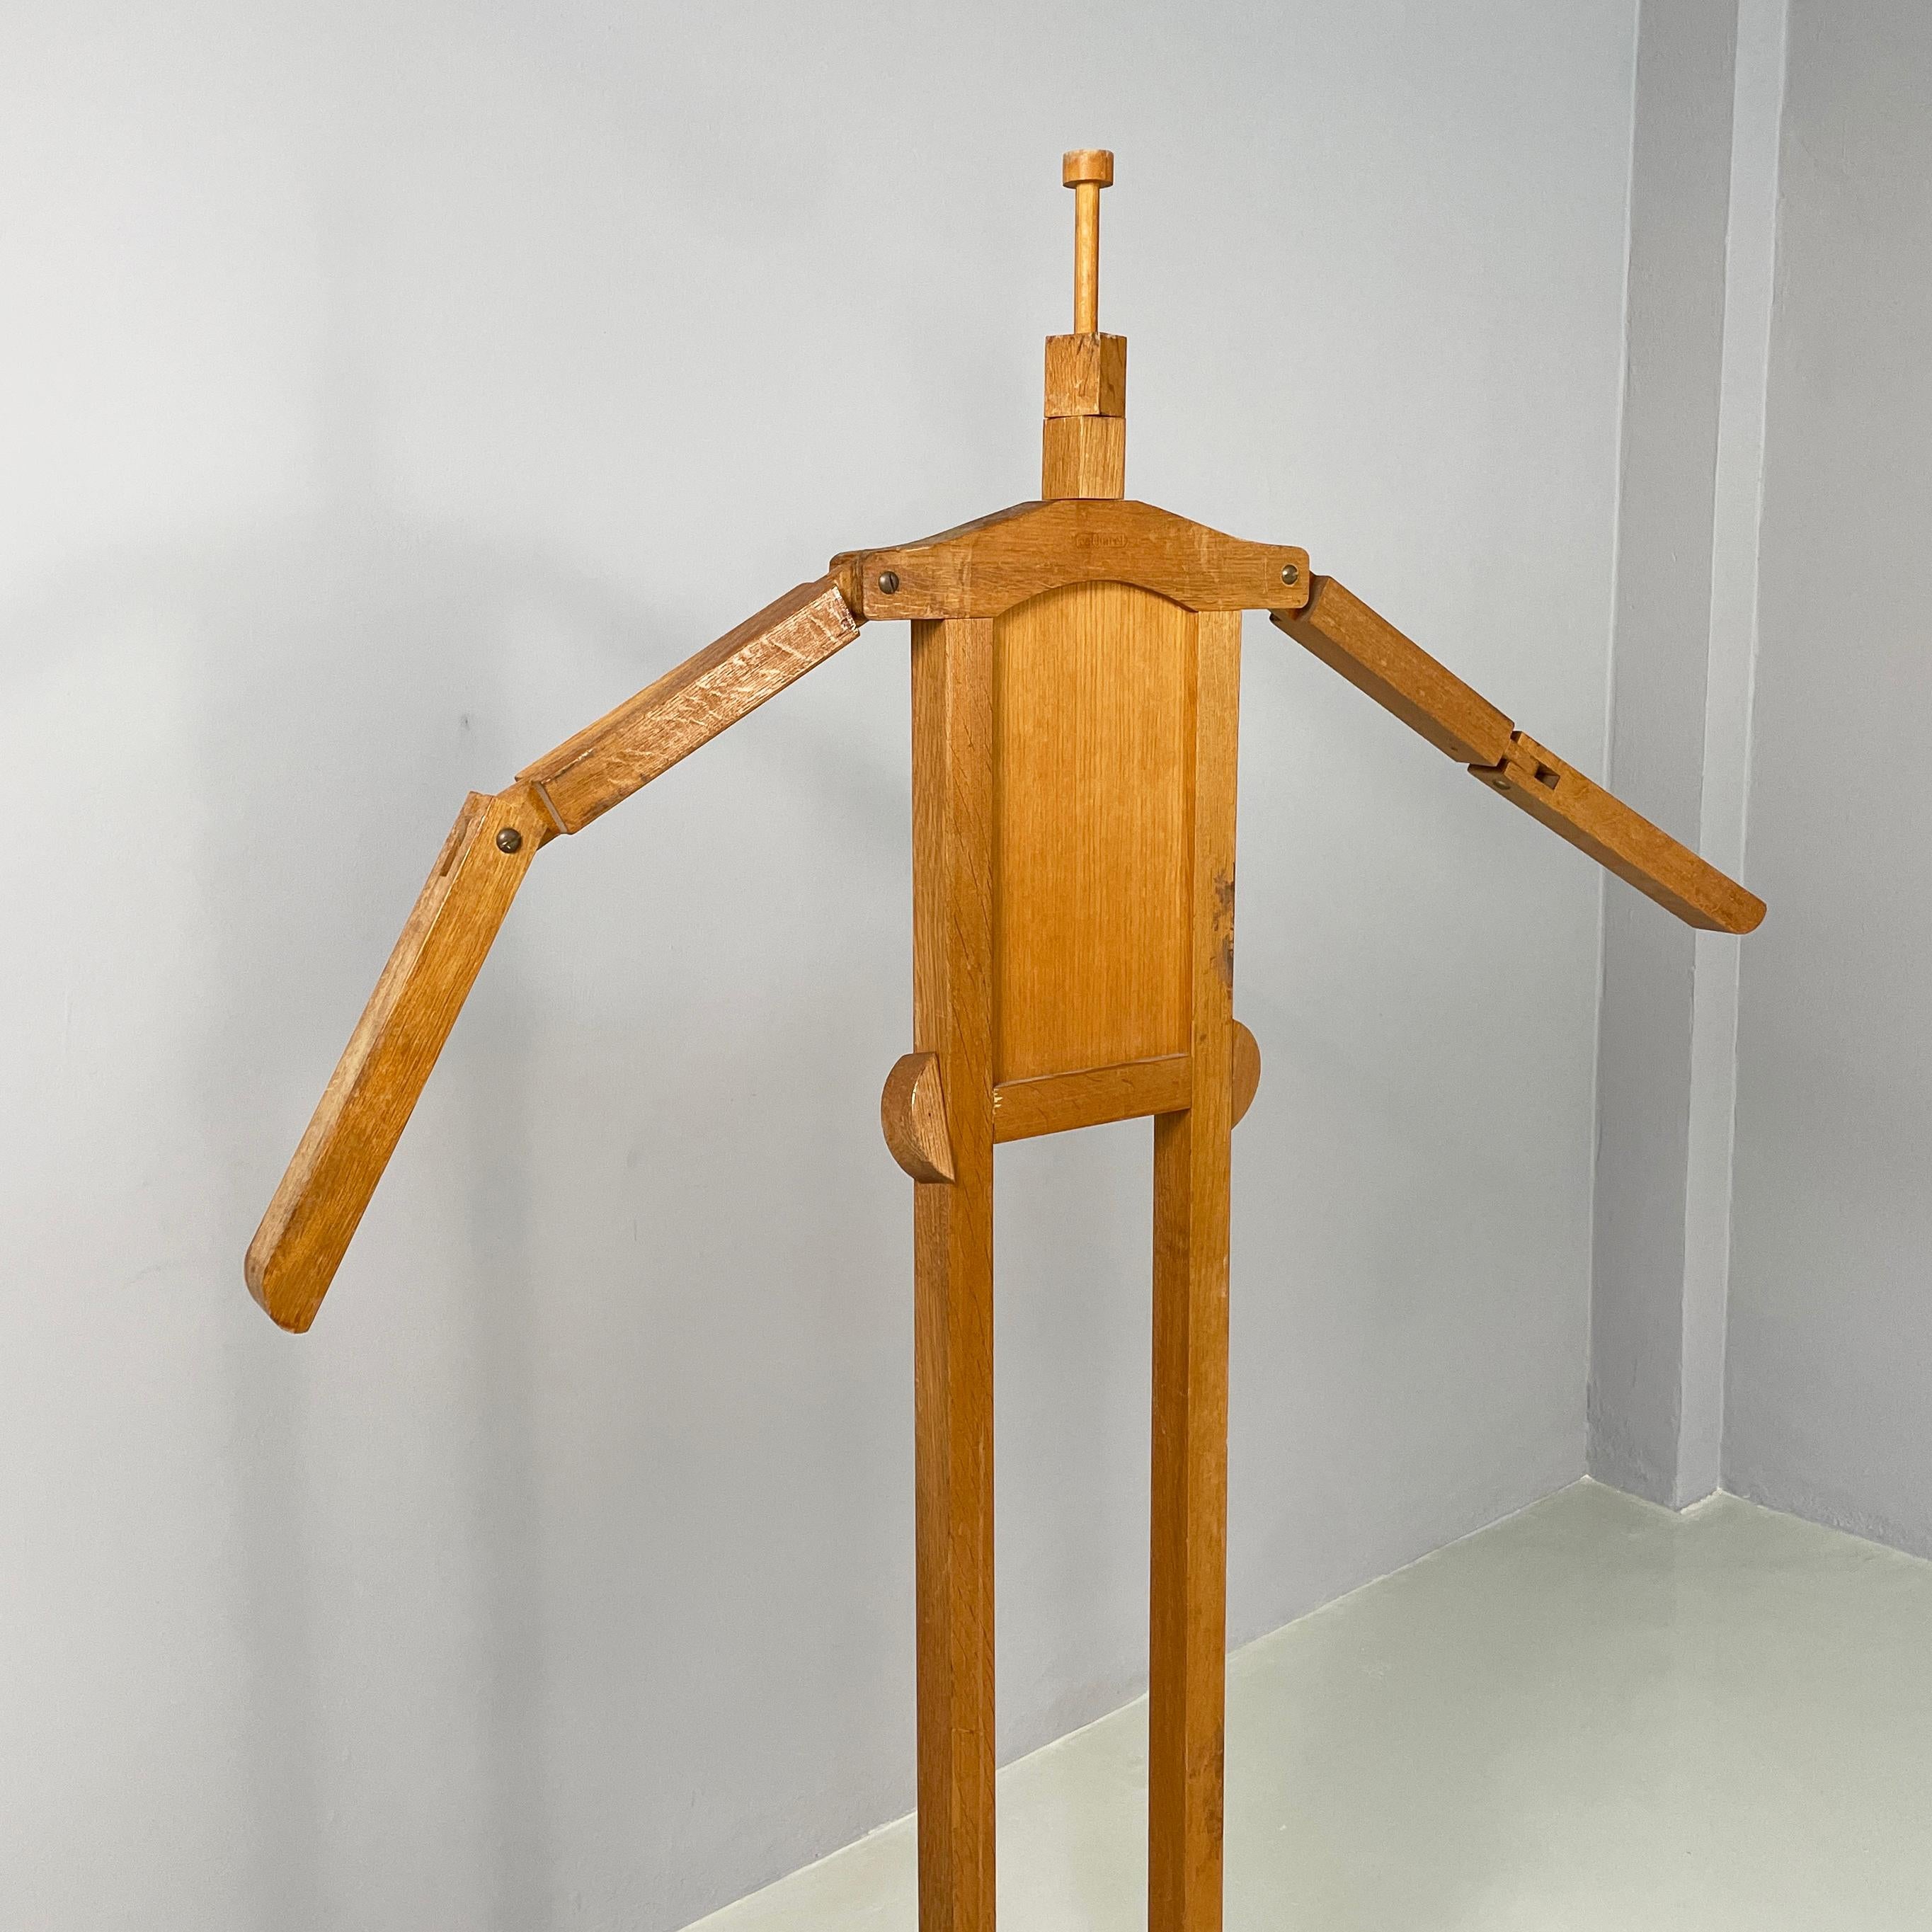 Italian modern Wood valet stand with hat holder by BeroDesign Cacharel, 1980s For Sale 3